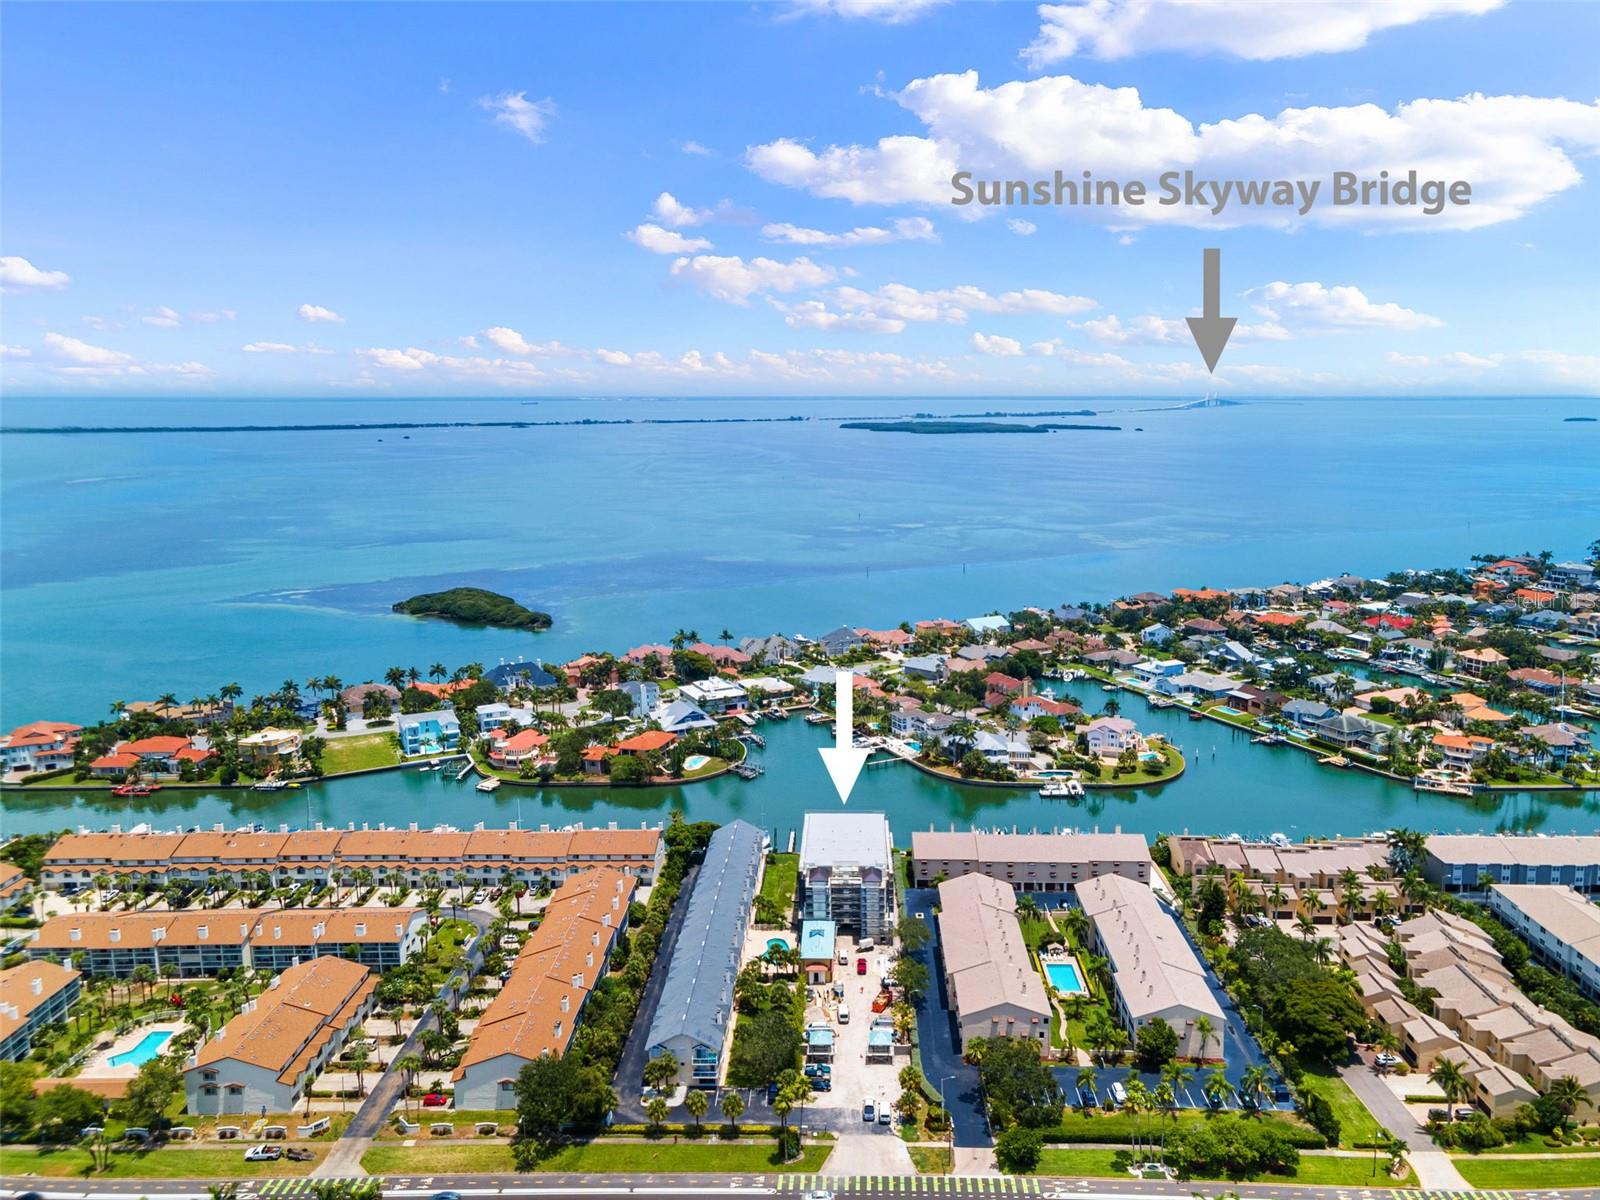 This is a great photo that shows how close Quiet Cove is to the Sunshine Skyway Bridge and great fishing!!...